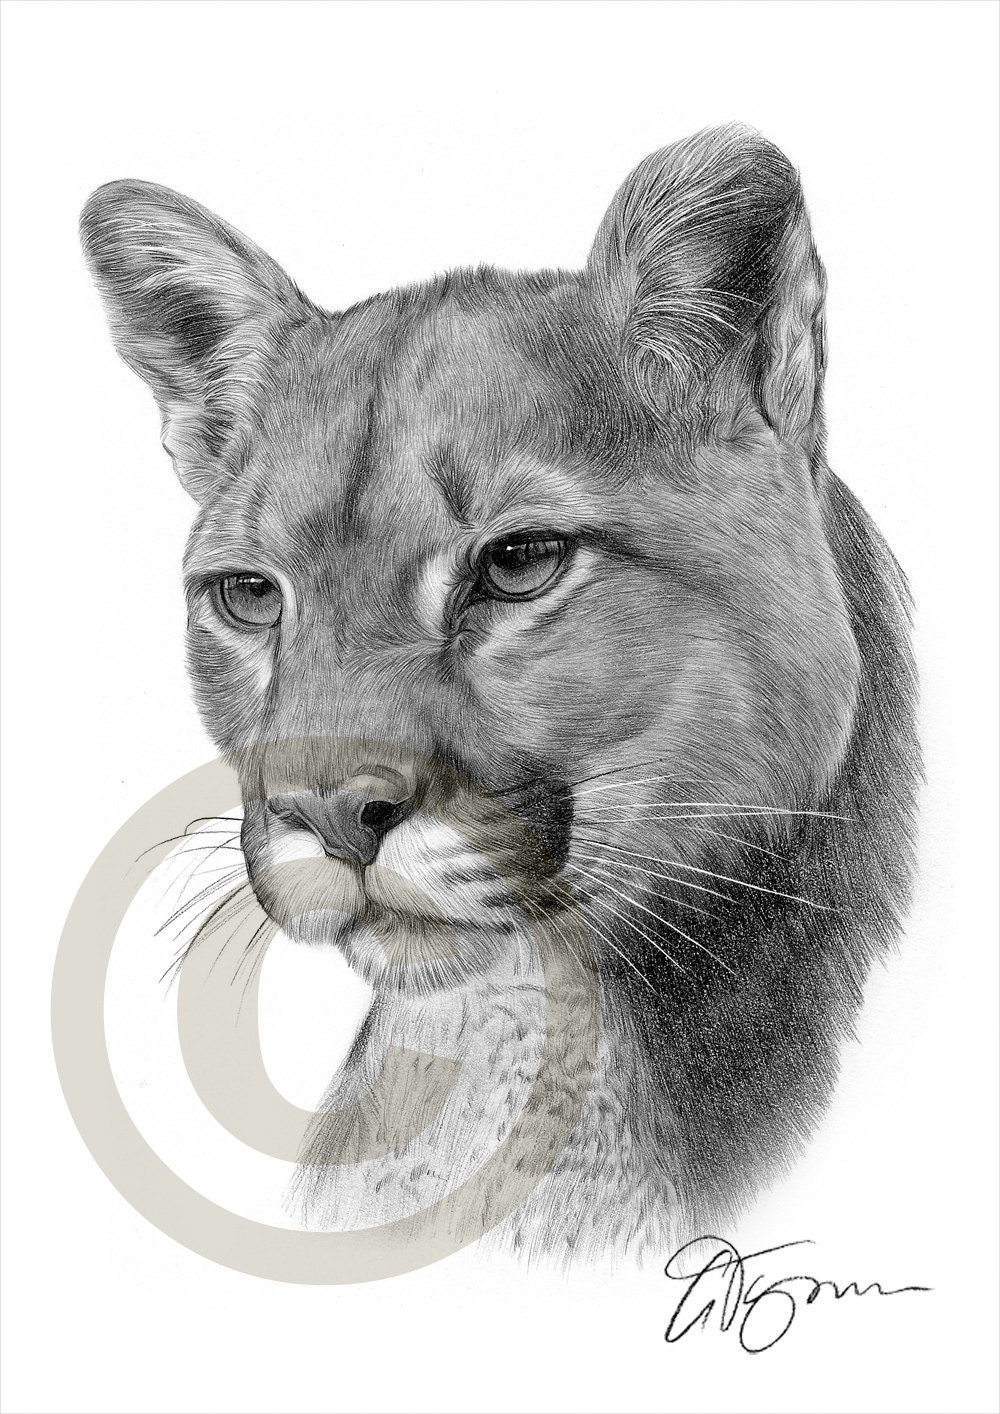 how to draw a cougar